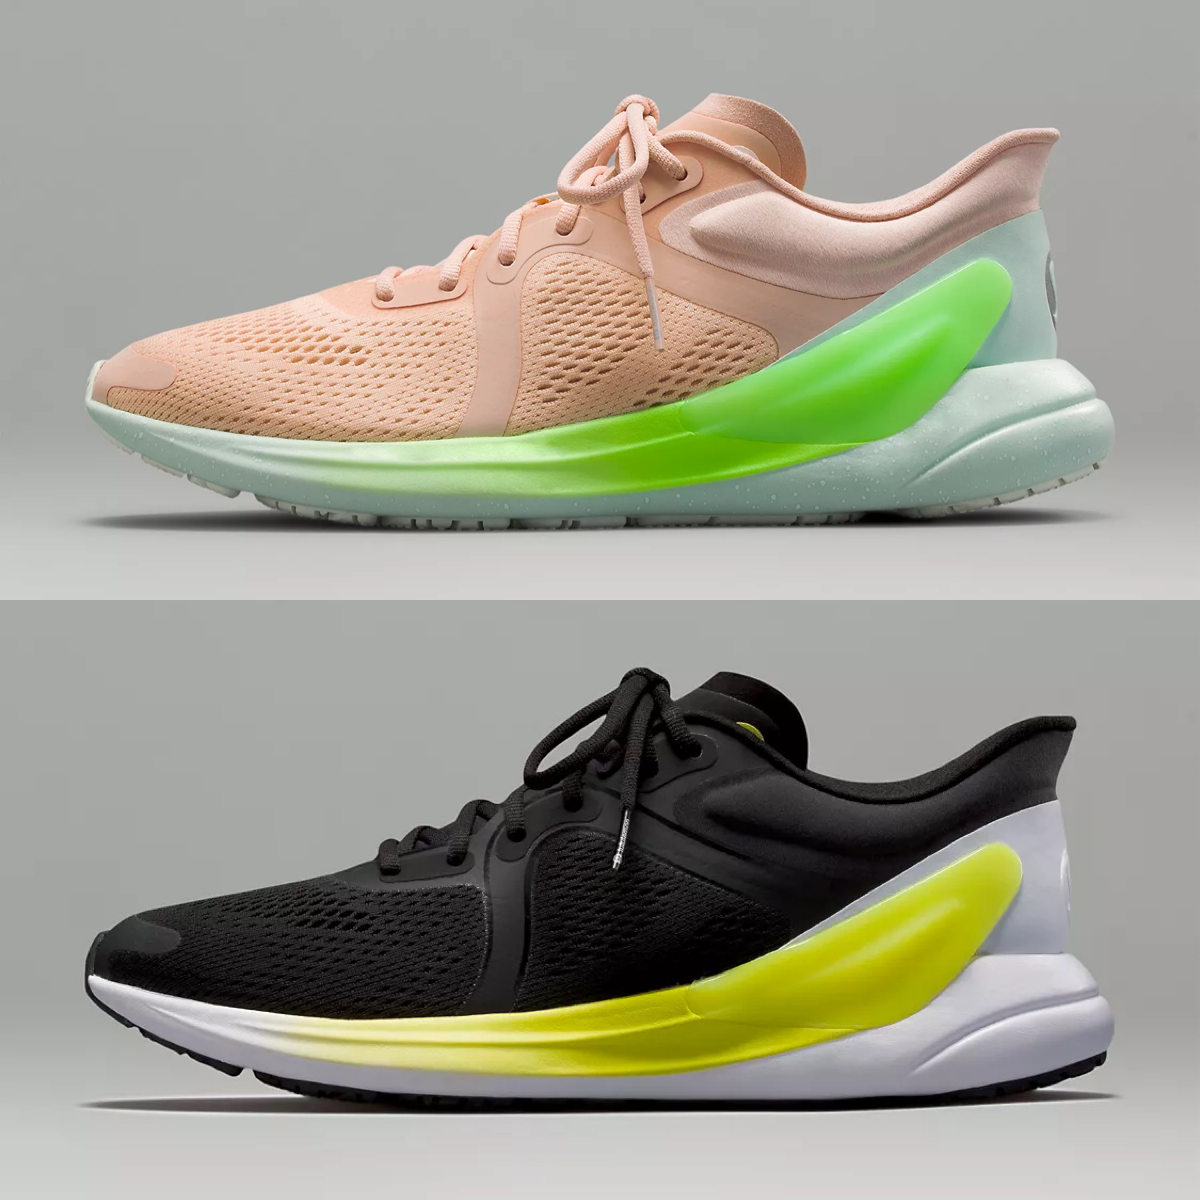 What Reviewers Are Saying About Lululemon's New Running Shoes